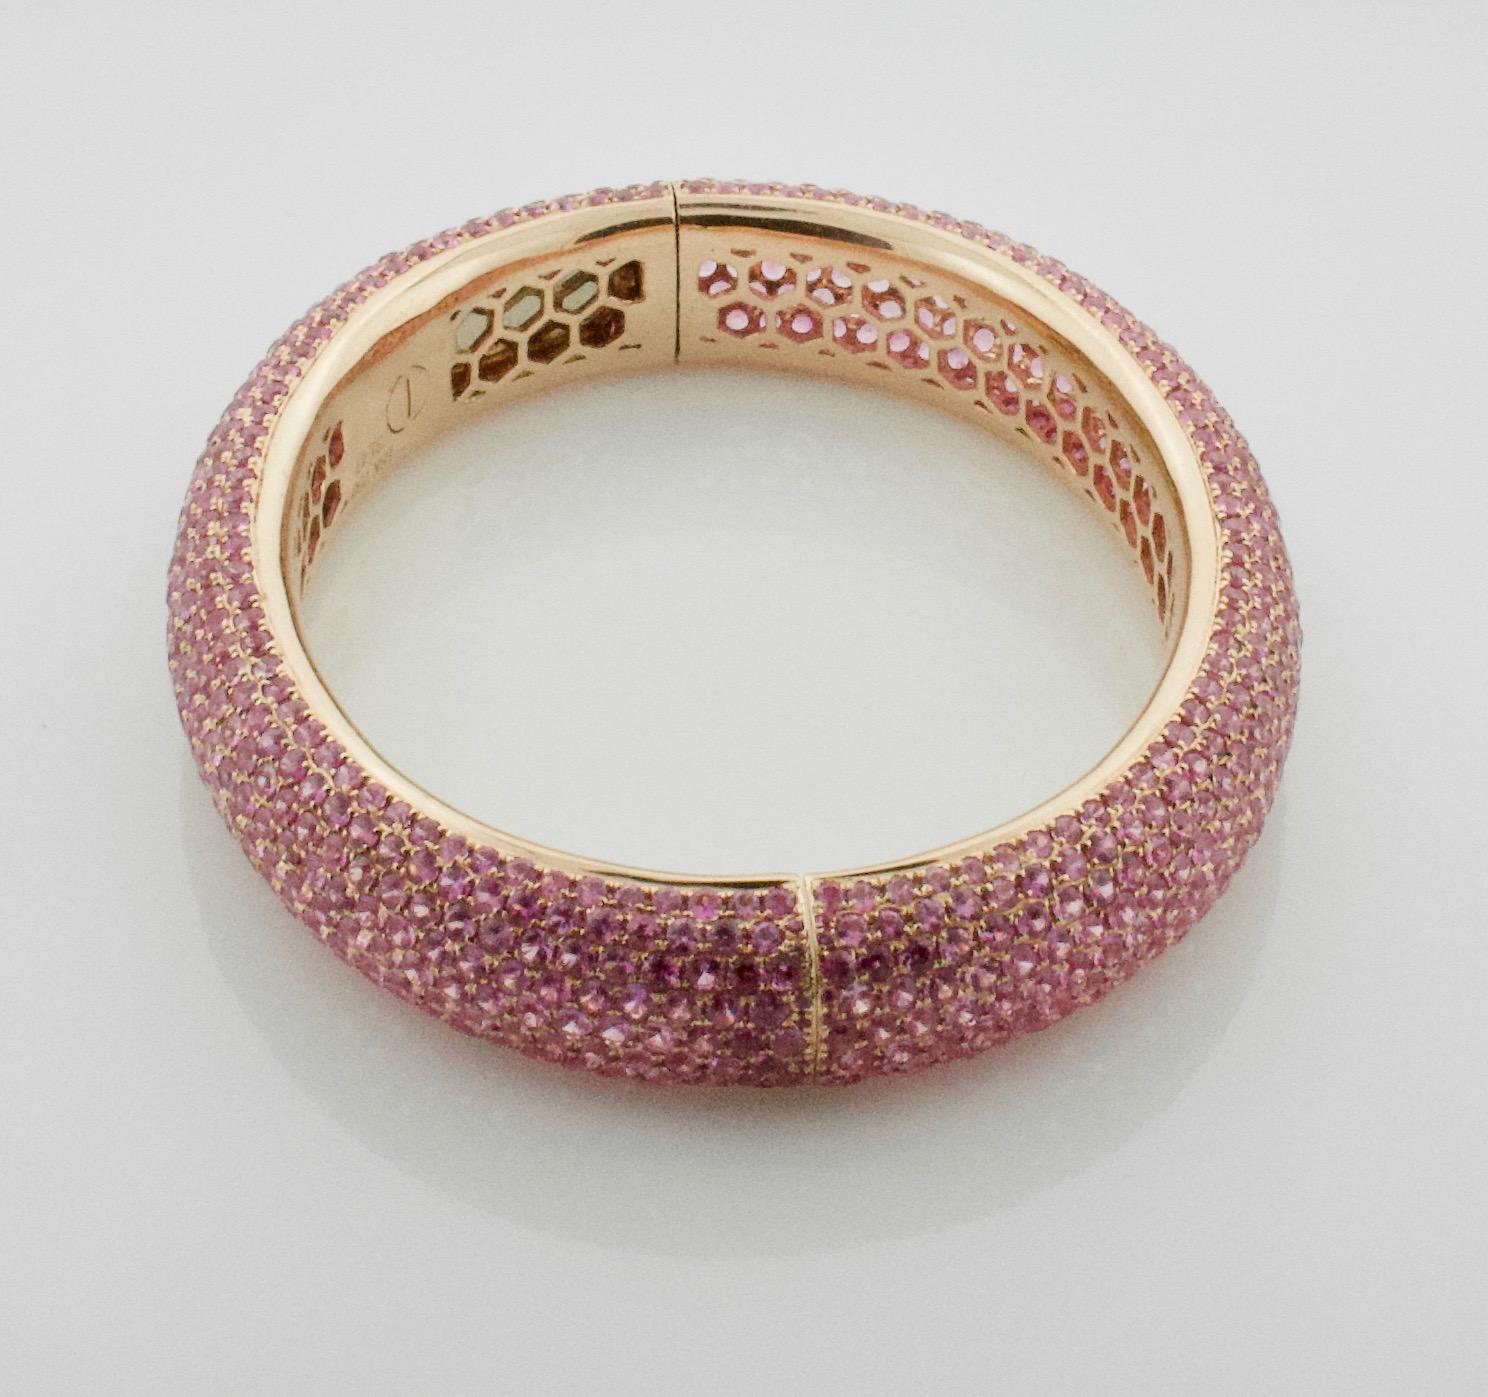 Stunning Pink Sapphire Bangle Bracelet in 18 Karat Rose Gold 31.47 Carat In New Condition For Sale In Wailea, HI